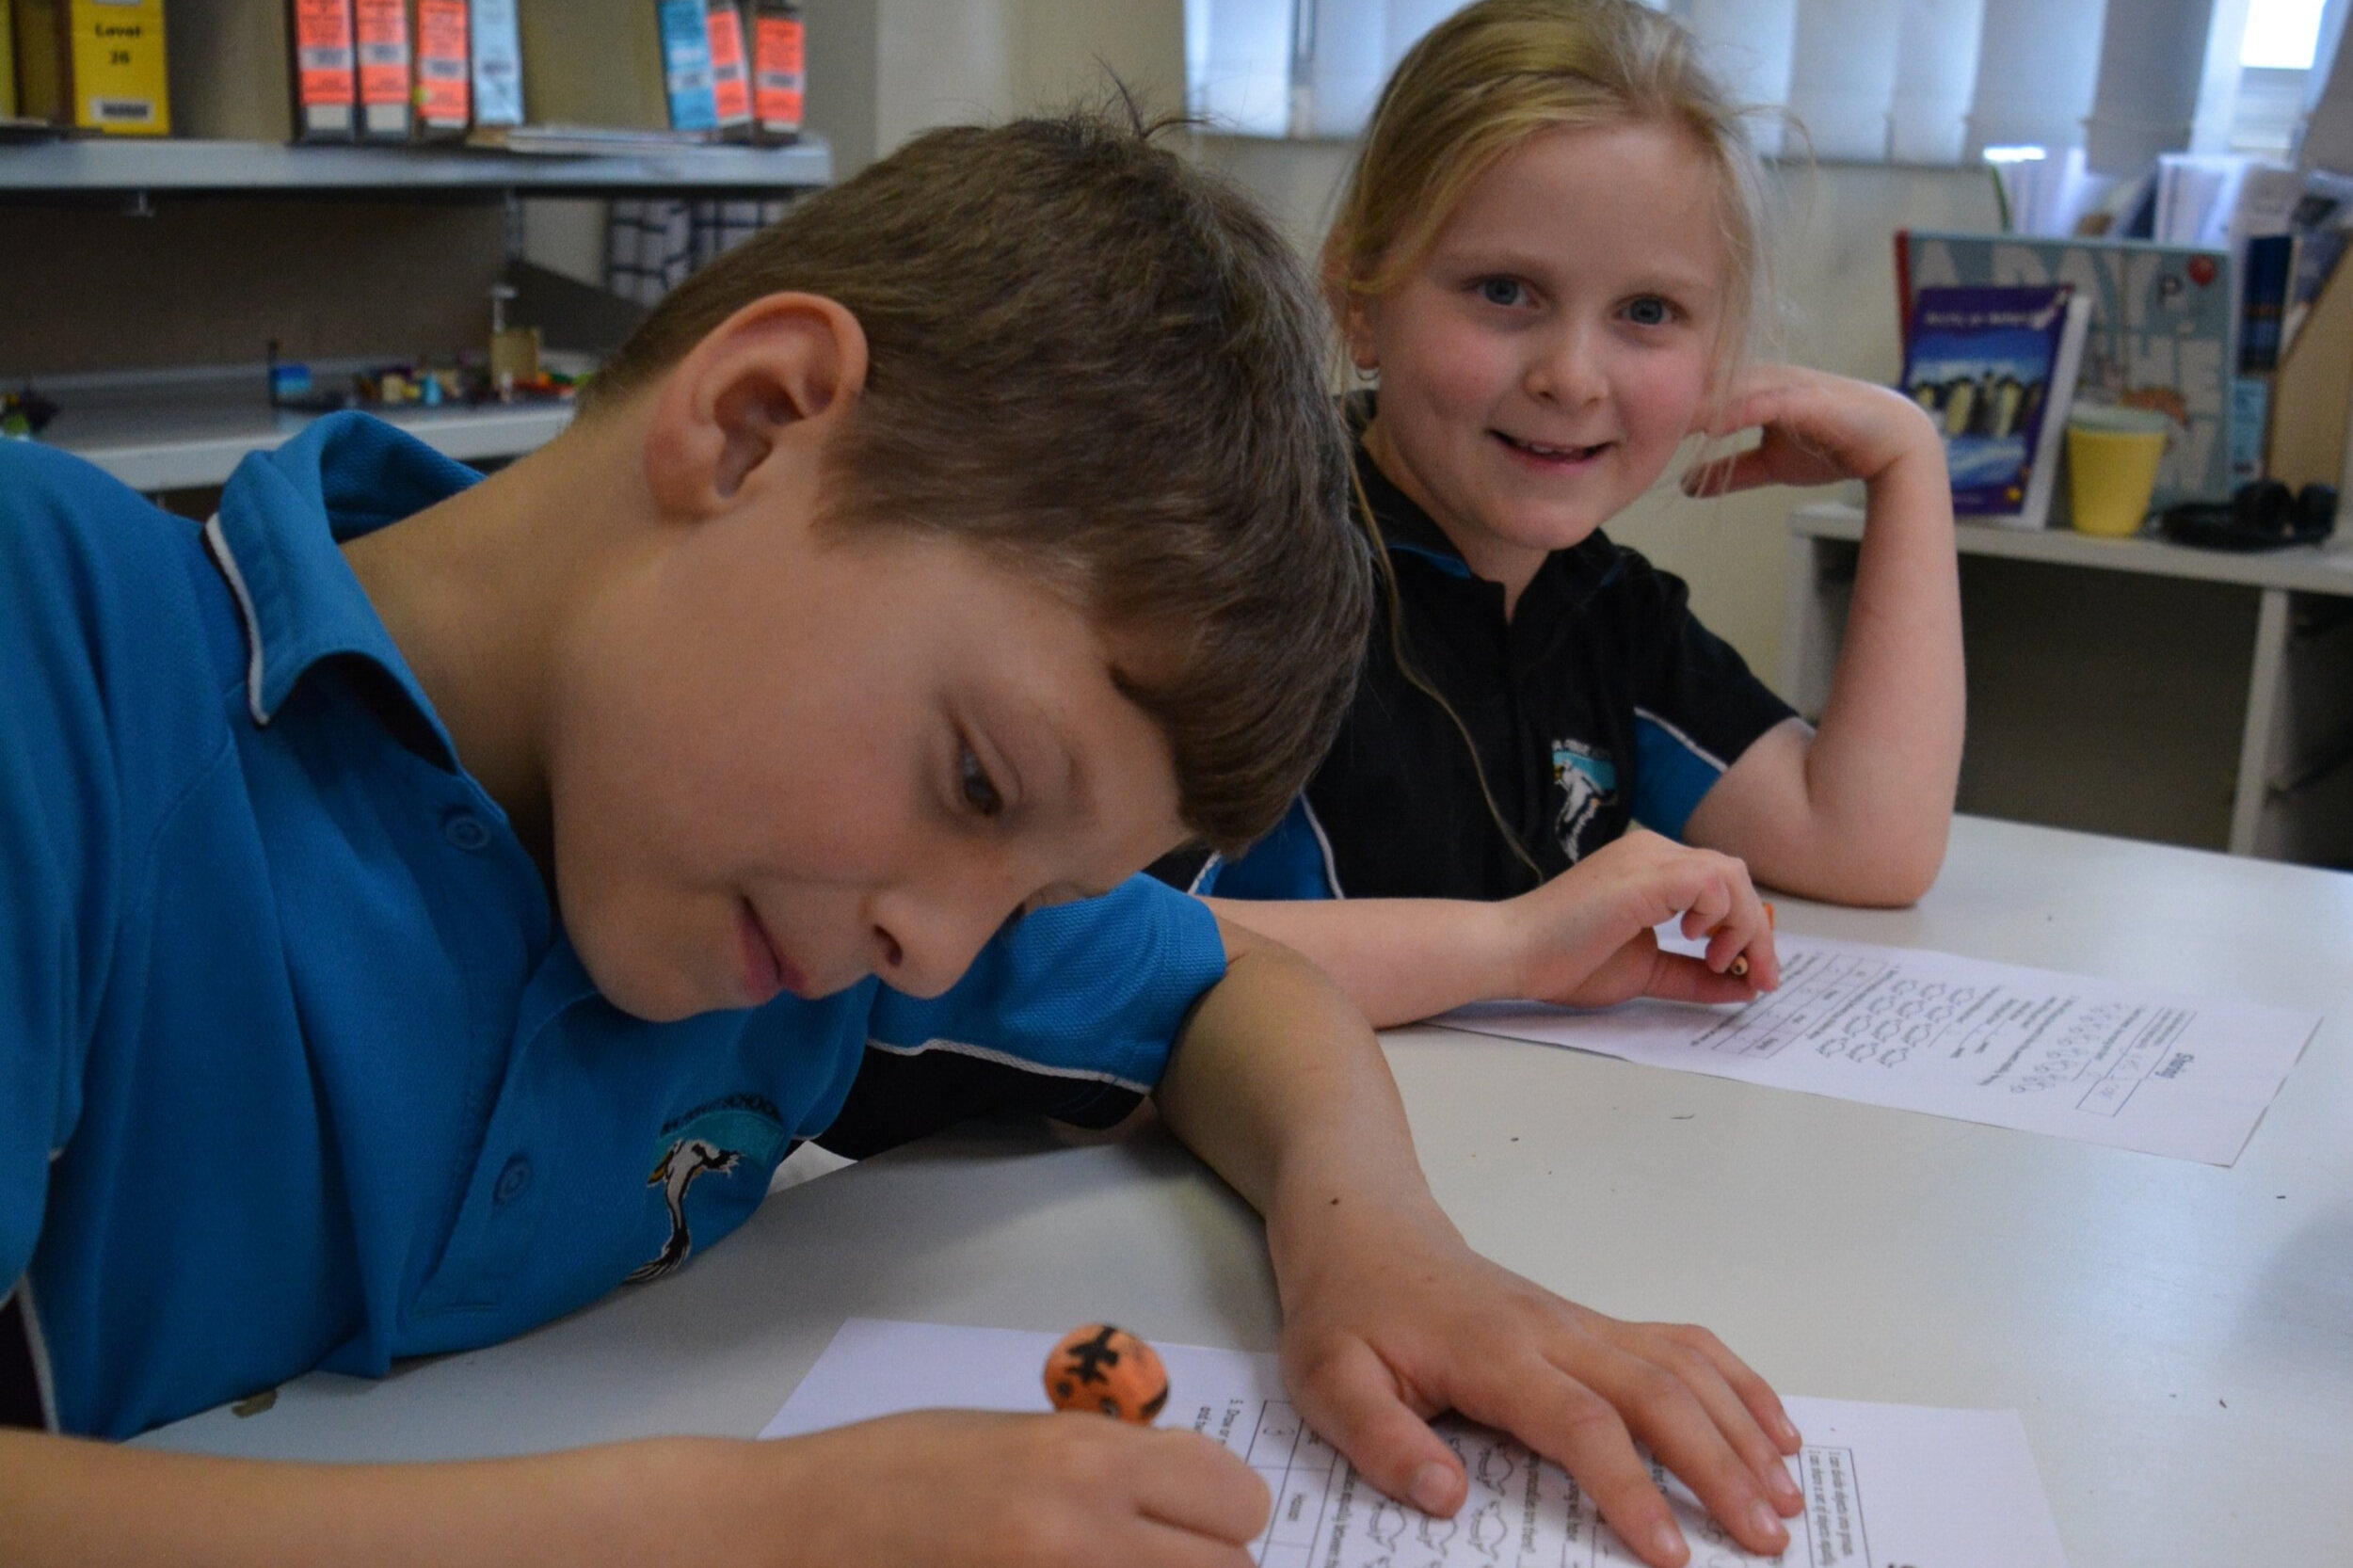 Puzzles and Games — Goolwa Primary School